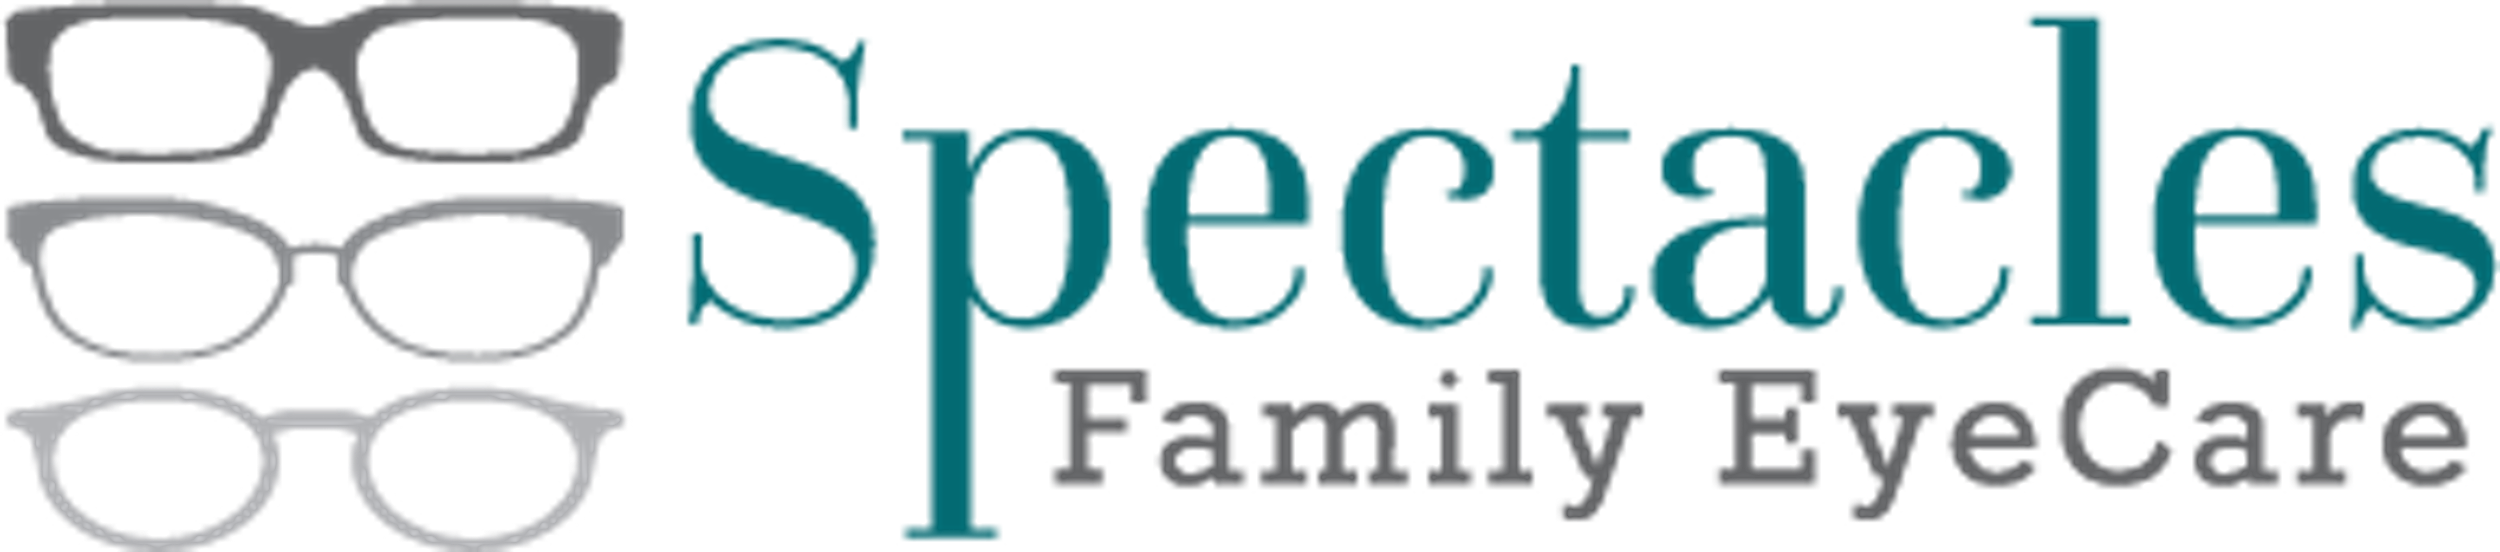 Spectacles Family EyeCare